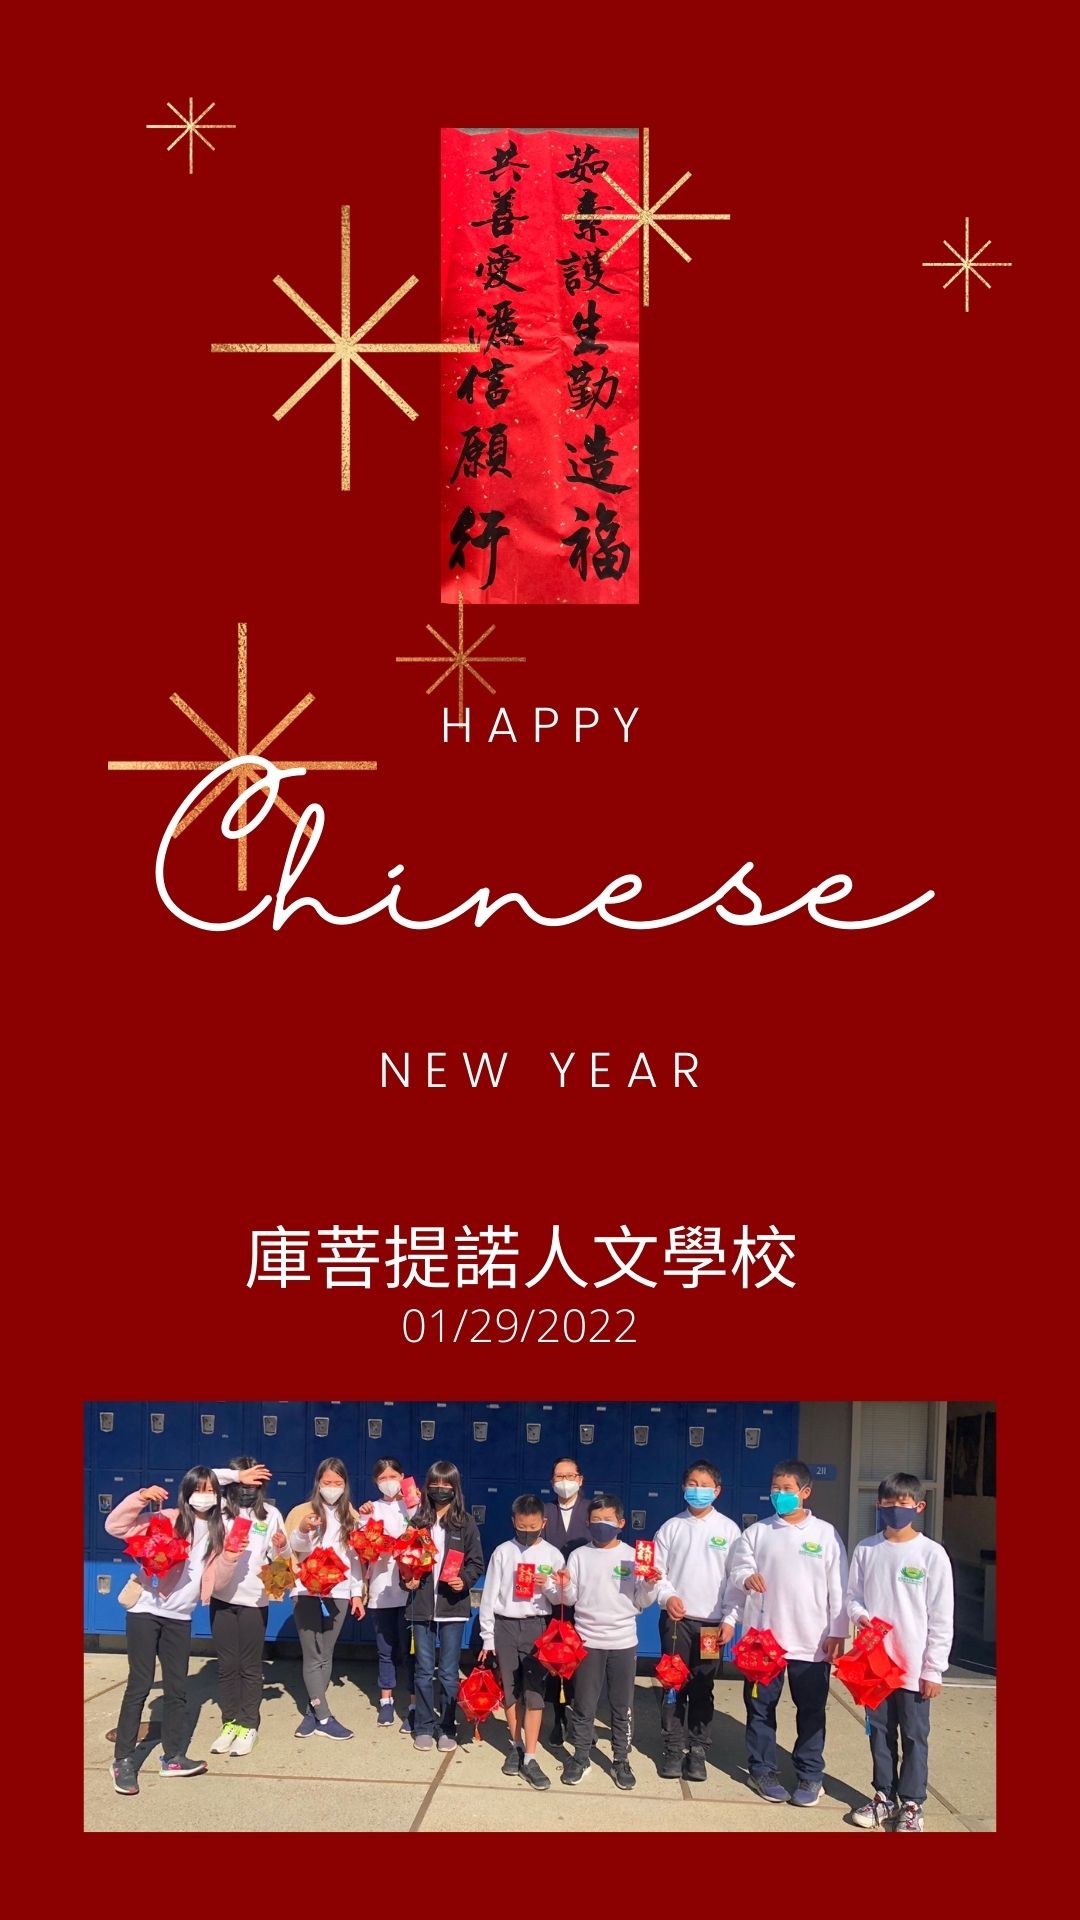 Red and White Illustrated Chinese New Year Instagram Story